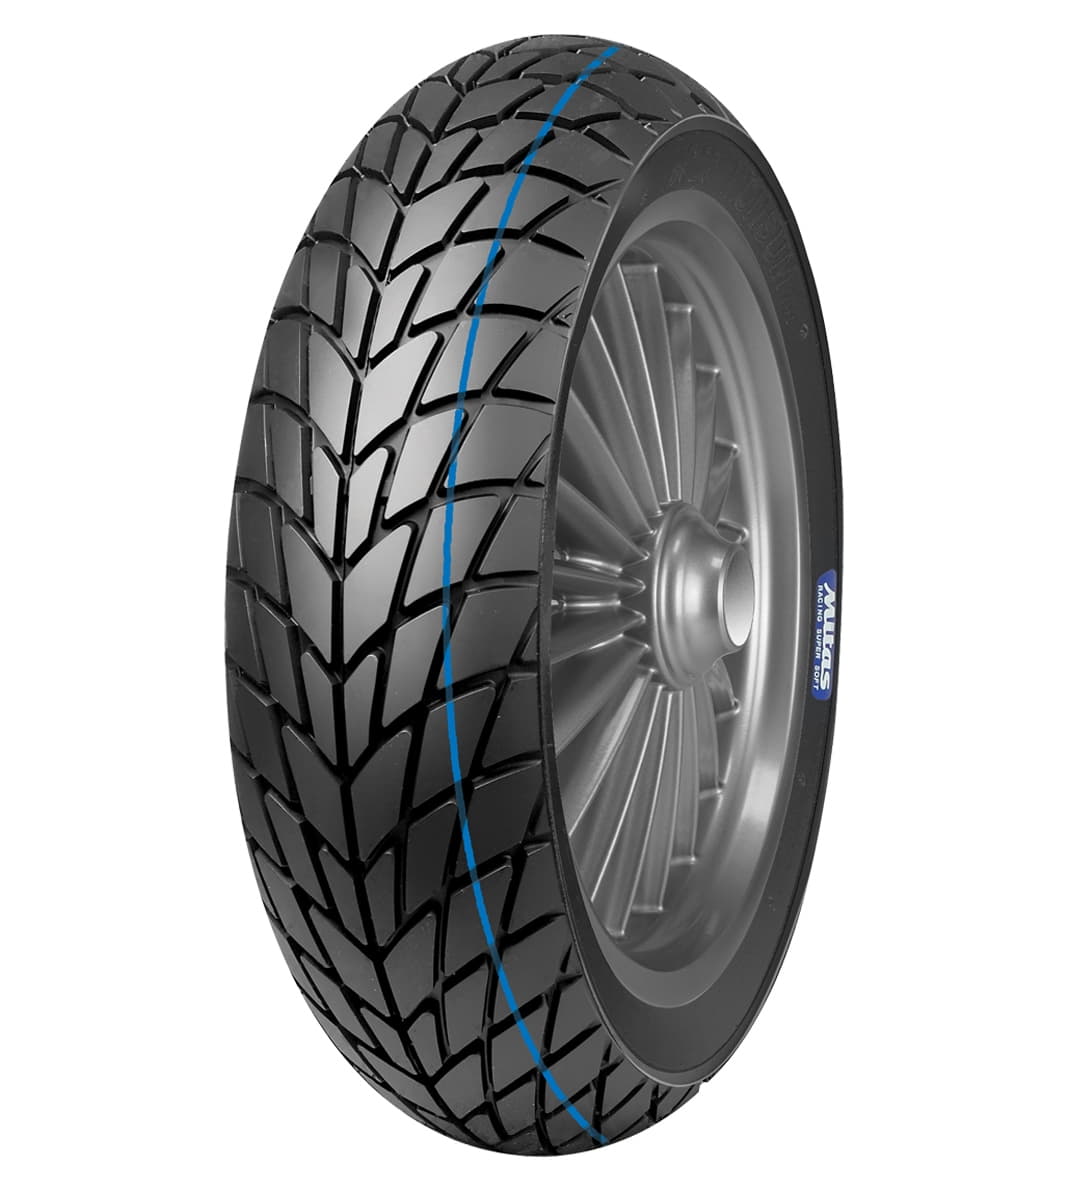 Mitas MC 20 MONSUM 100/90-12 Scooter Racing SUPER SOFT 49P Blue Tubeless Front, Rear Tire Motorcycle Tires Mitas 